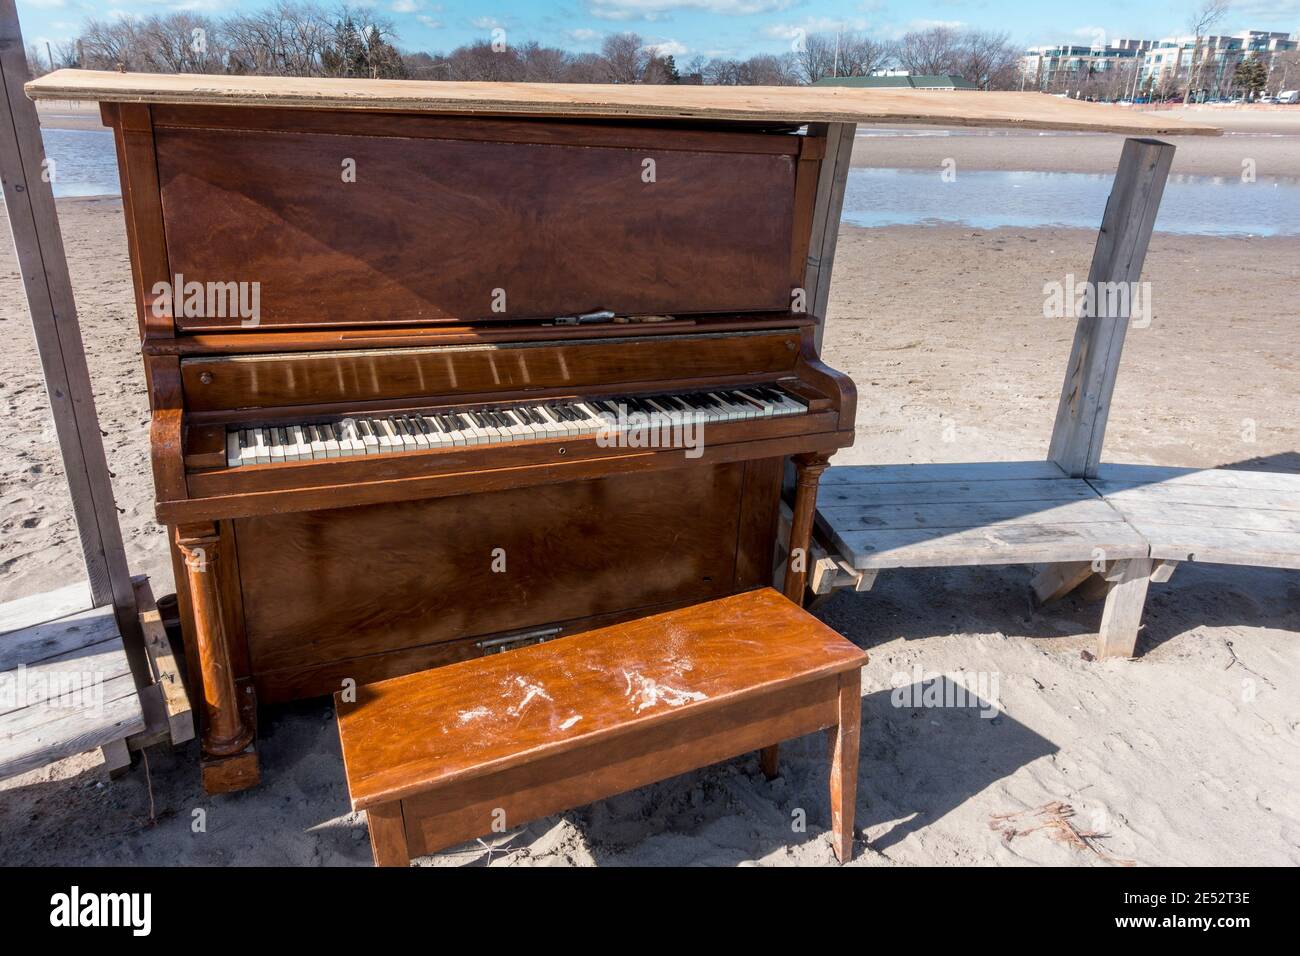 An abandoned piano left on Woodbine Beach diuring a winter outdoor art exhibition. Stock Photo